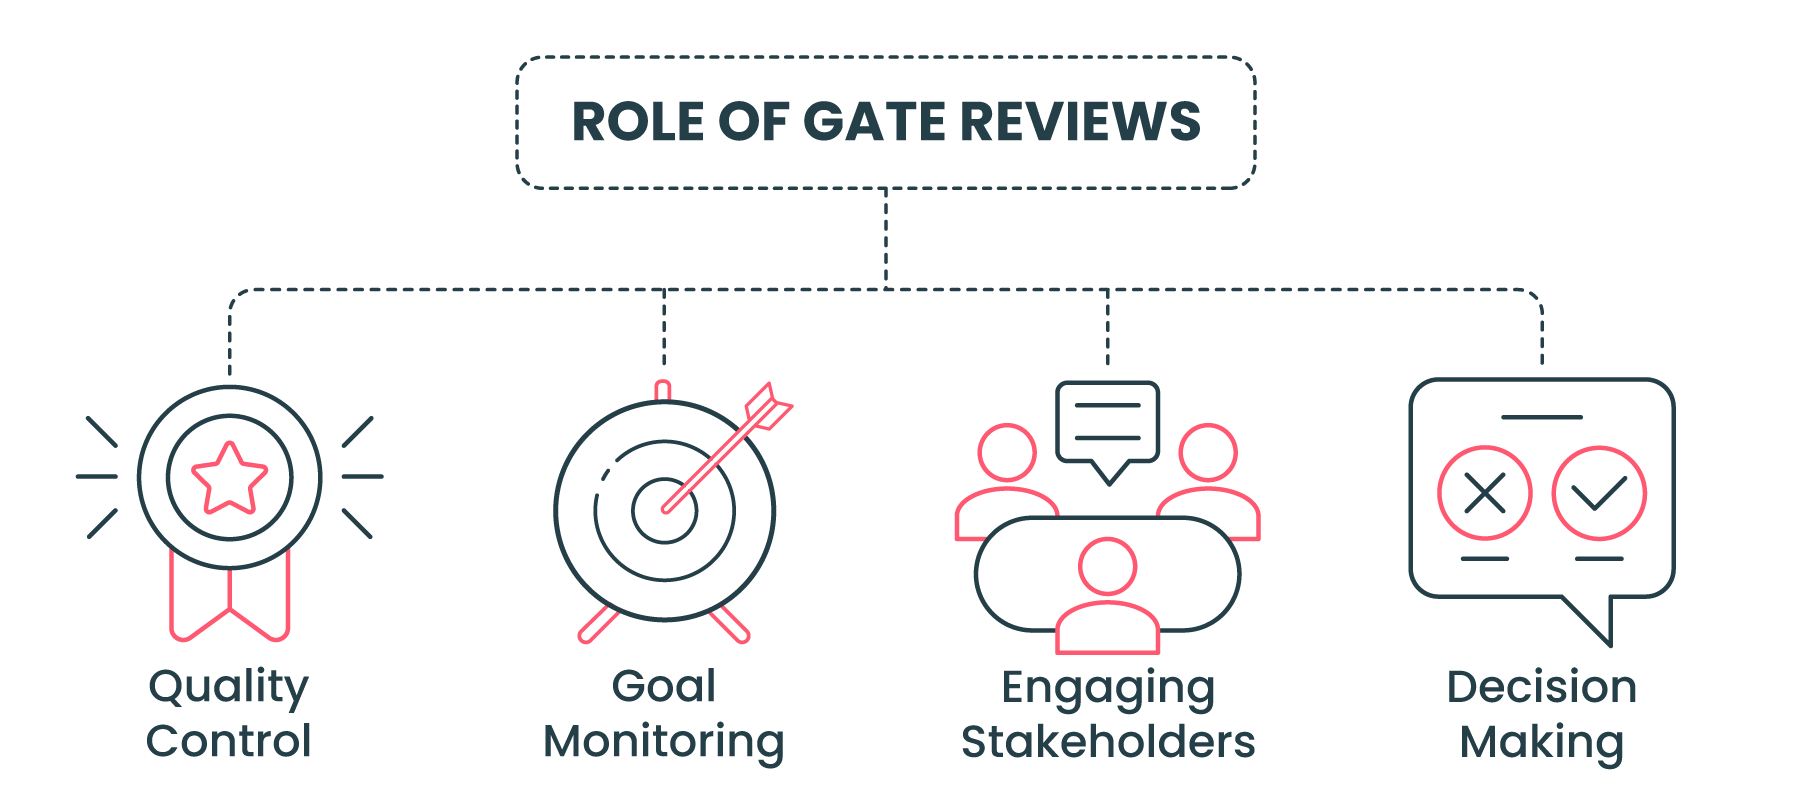 The Role of Gate Reviews